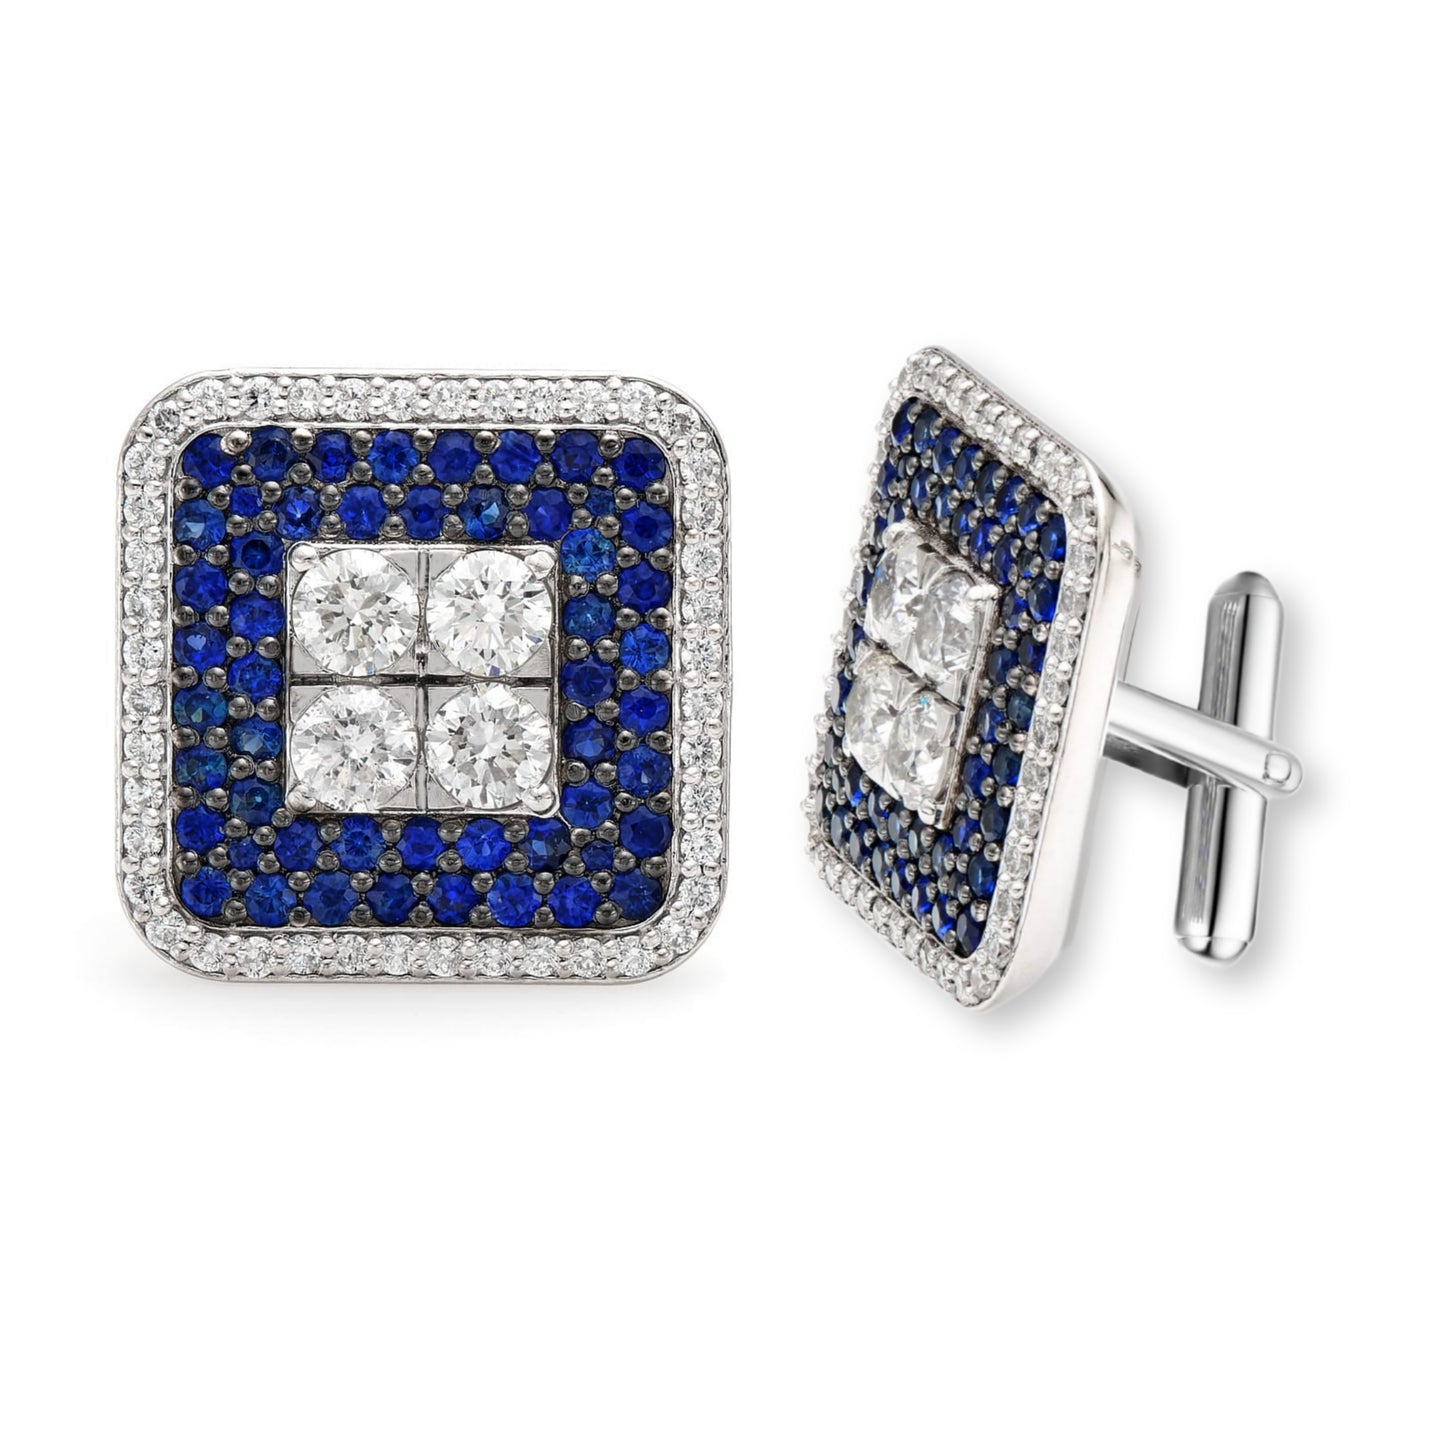 Rhodium Plated Sterling Silver Square Sapphire and Clear CZ Cufflinks